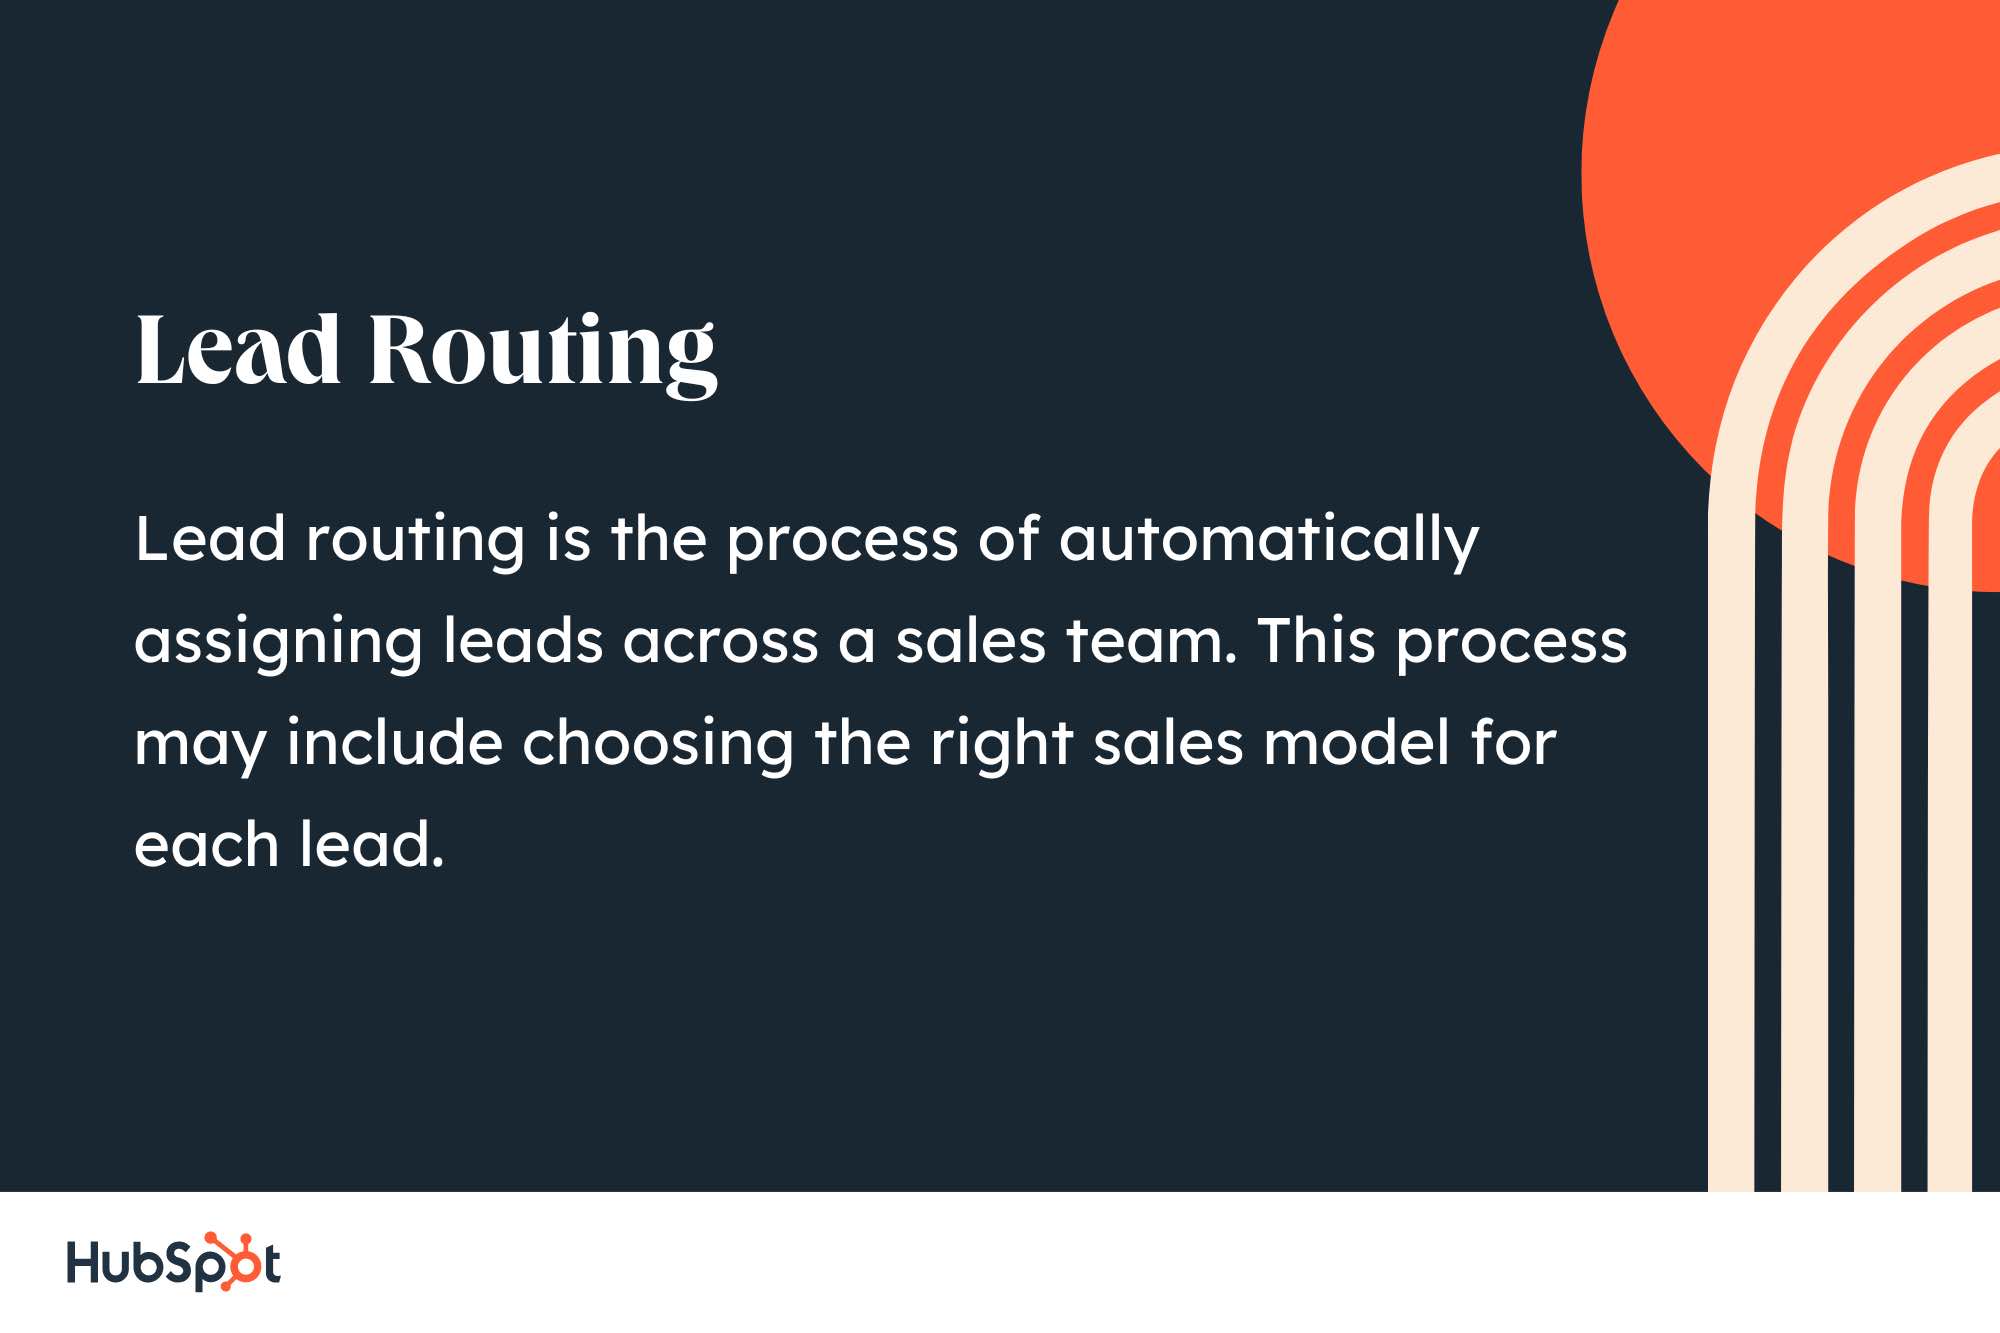 what is lead routing, lead routing is the process of automatically assigning leads across a sales team